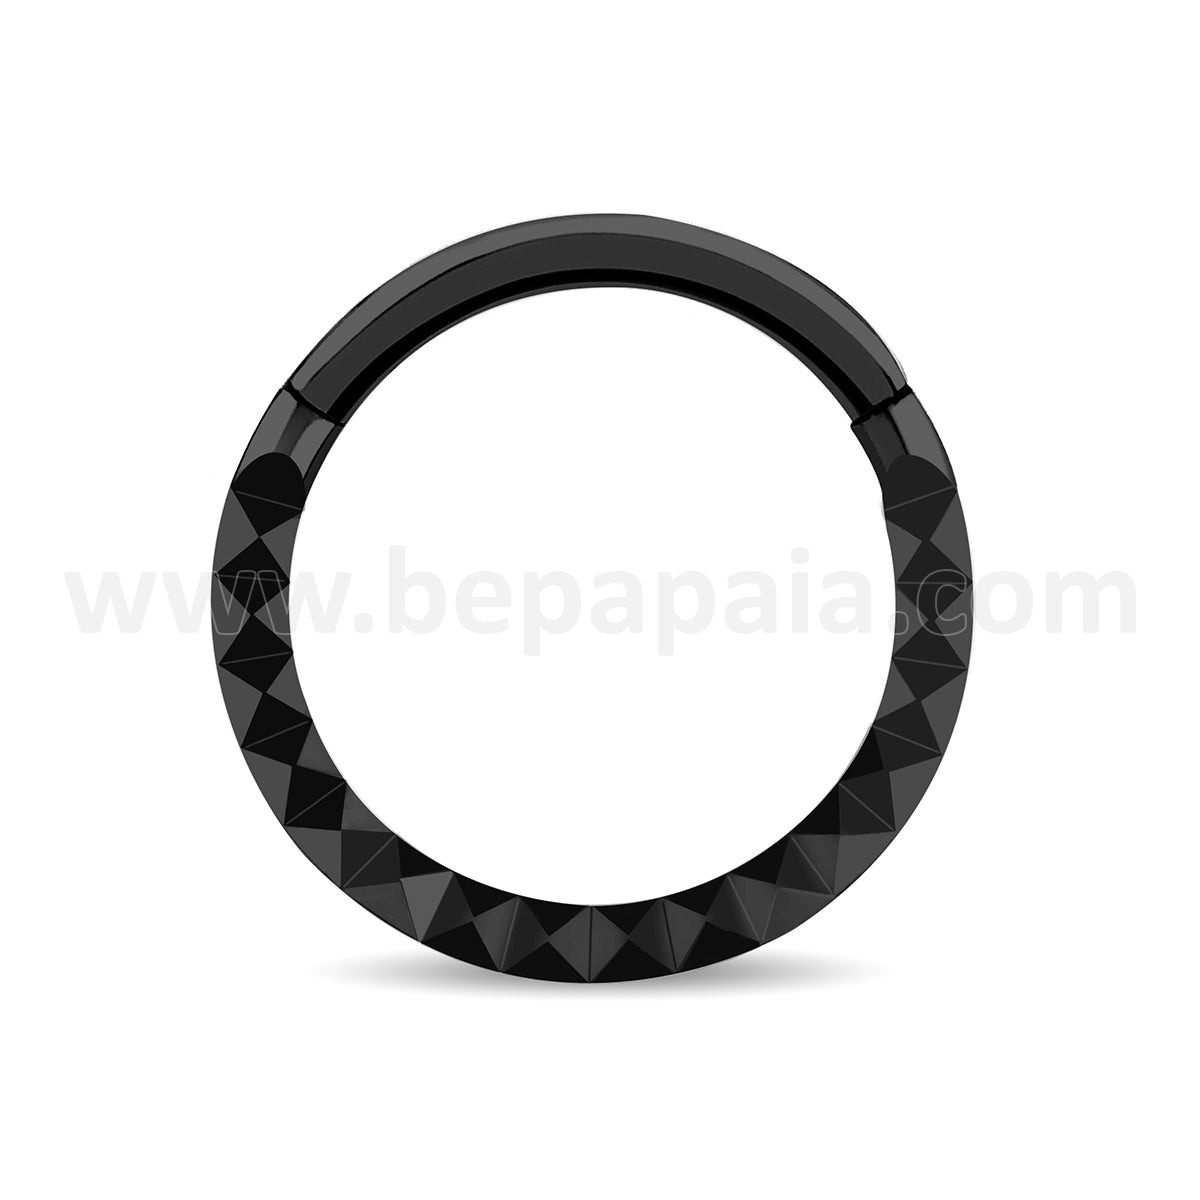 316L surgical steel hinged segment ring with pyramidal edge